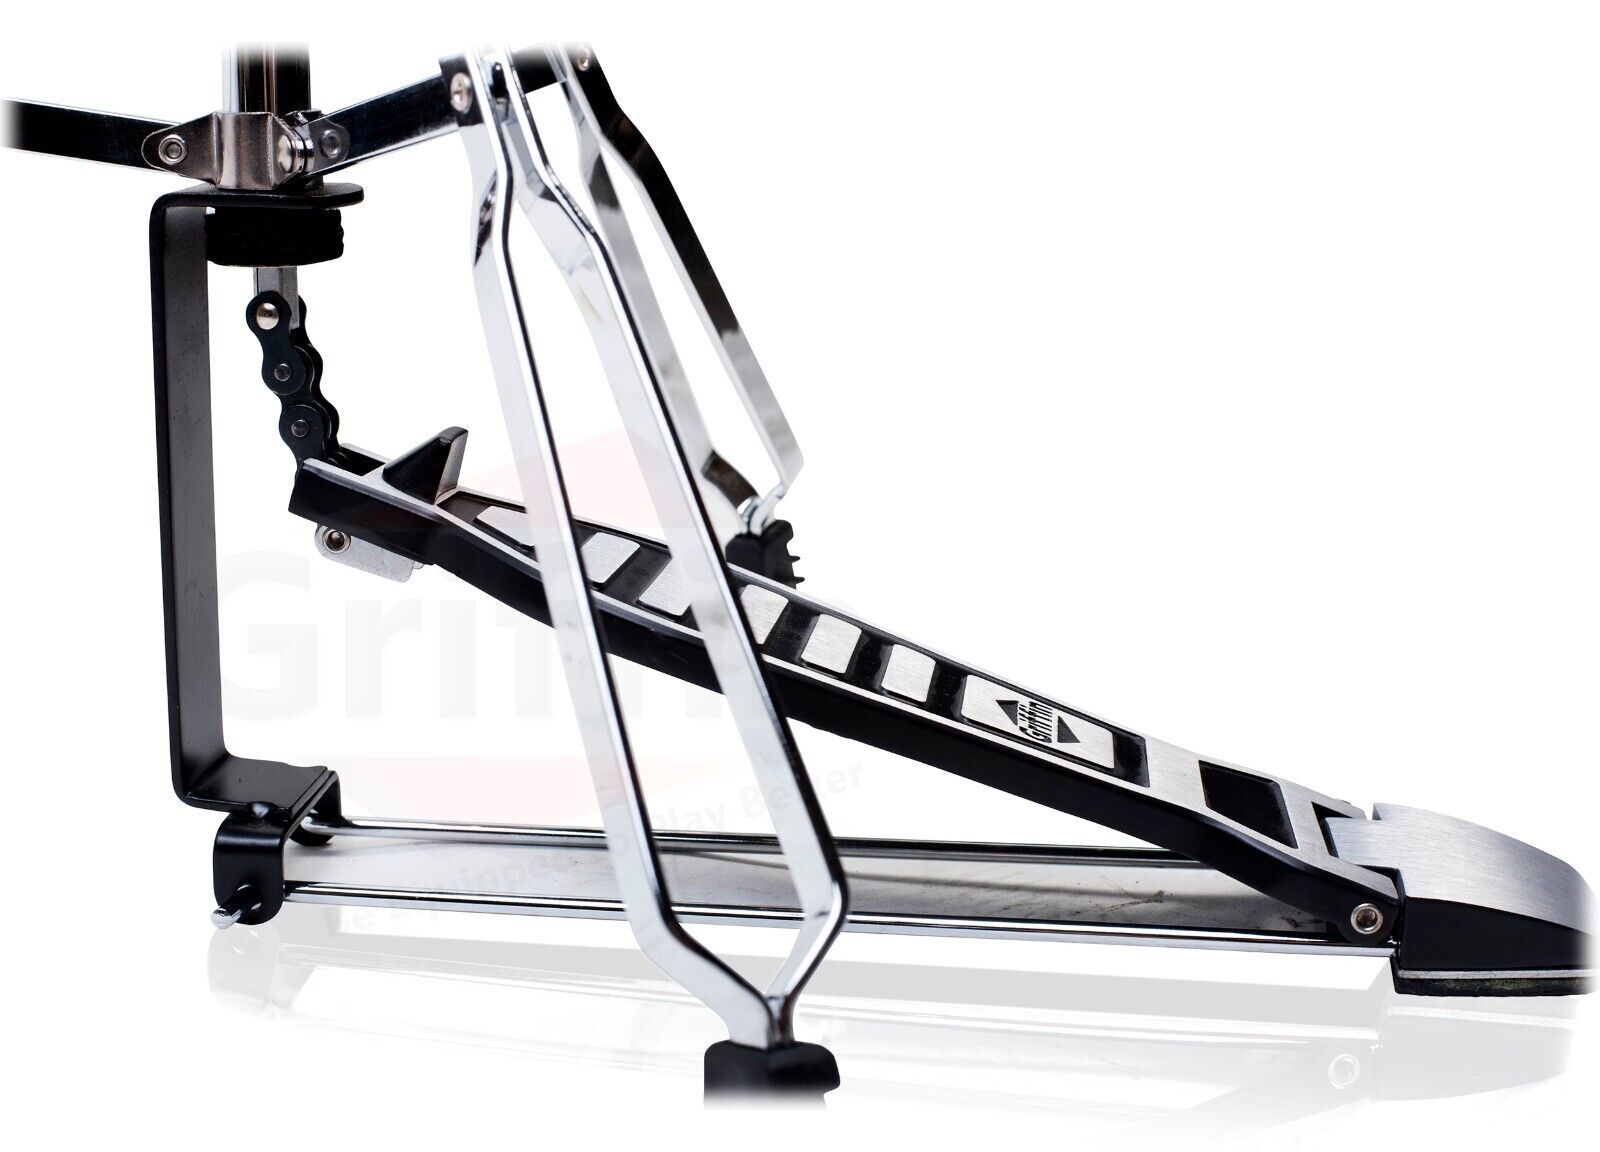 GRIFFIN Hi-Hat Stand | HiHat Cymbal Hardware Drum Pedal Holder Percussion Mount Griffin SM-LG-H80 - фотография #4